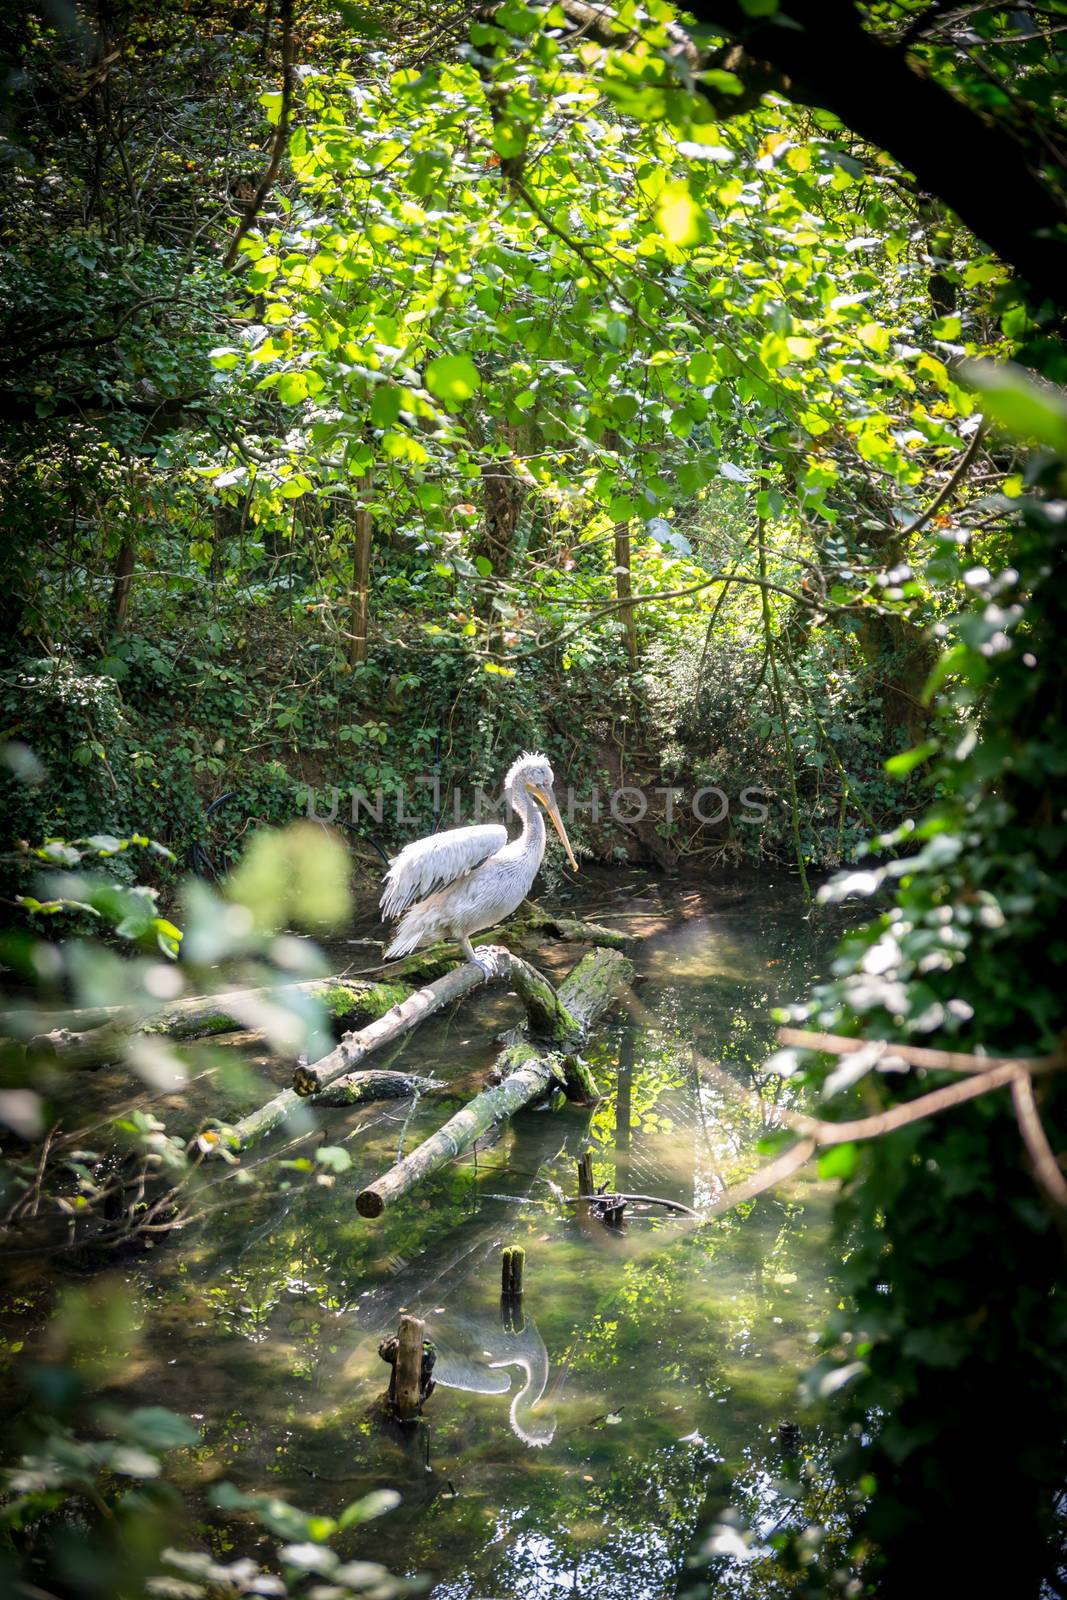 White Heron in a stream in the middle of the forest.